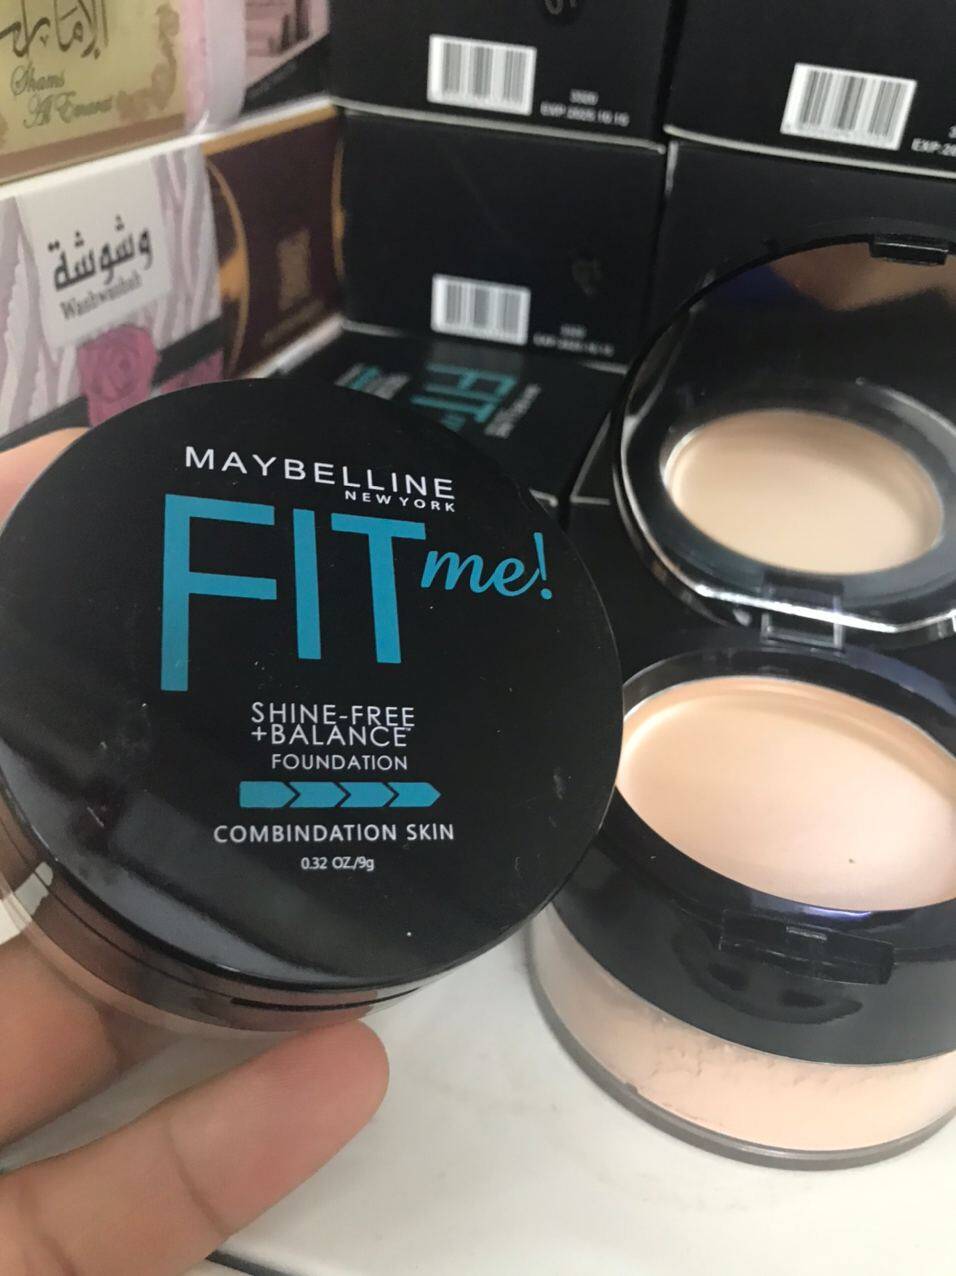 May belline fitme Makeup Gift Set 3 in 1